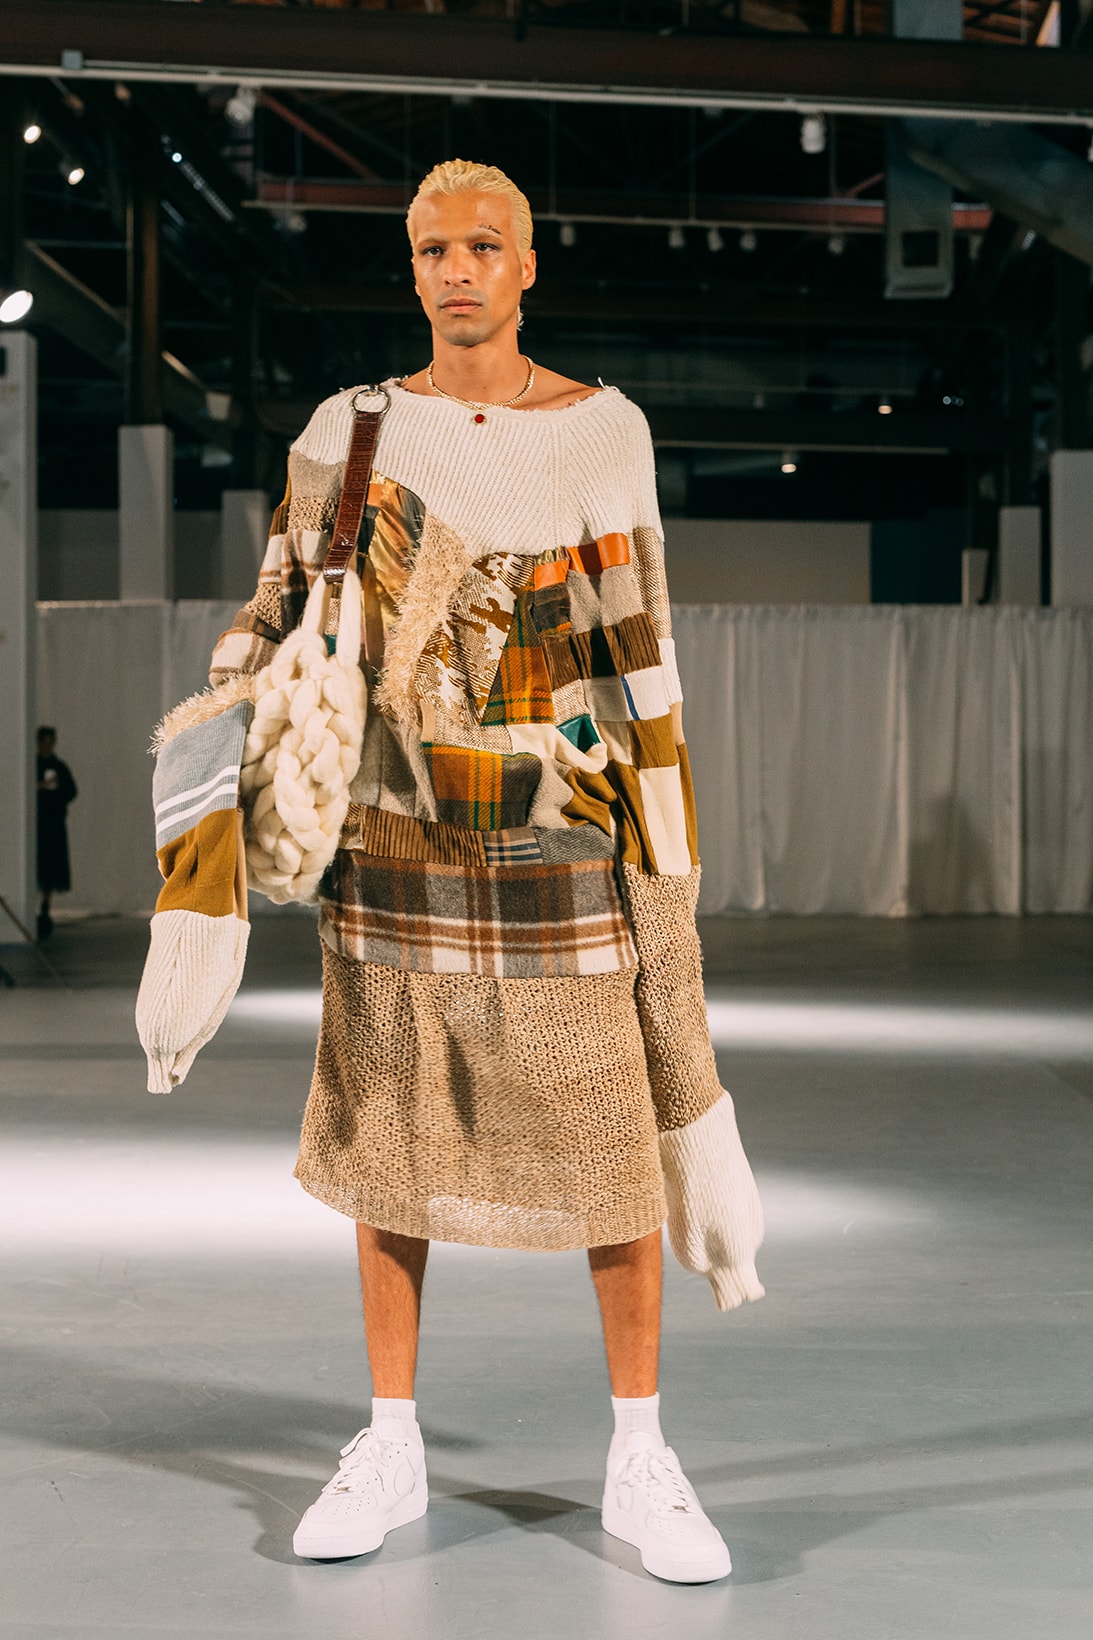 no sesso pierre davis arin hayes autumn randolph fall winter collection los angeles runway show sweater white sneakers